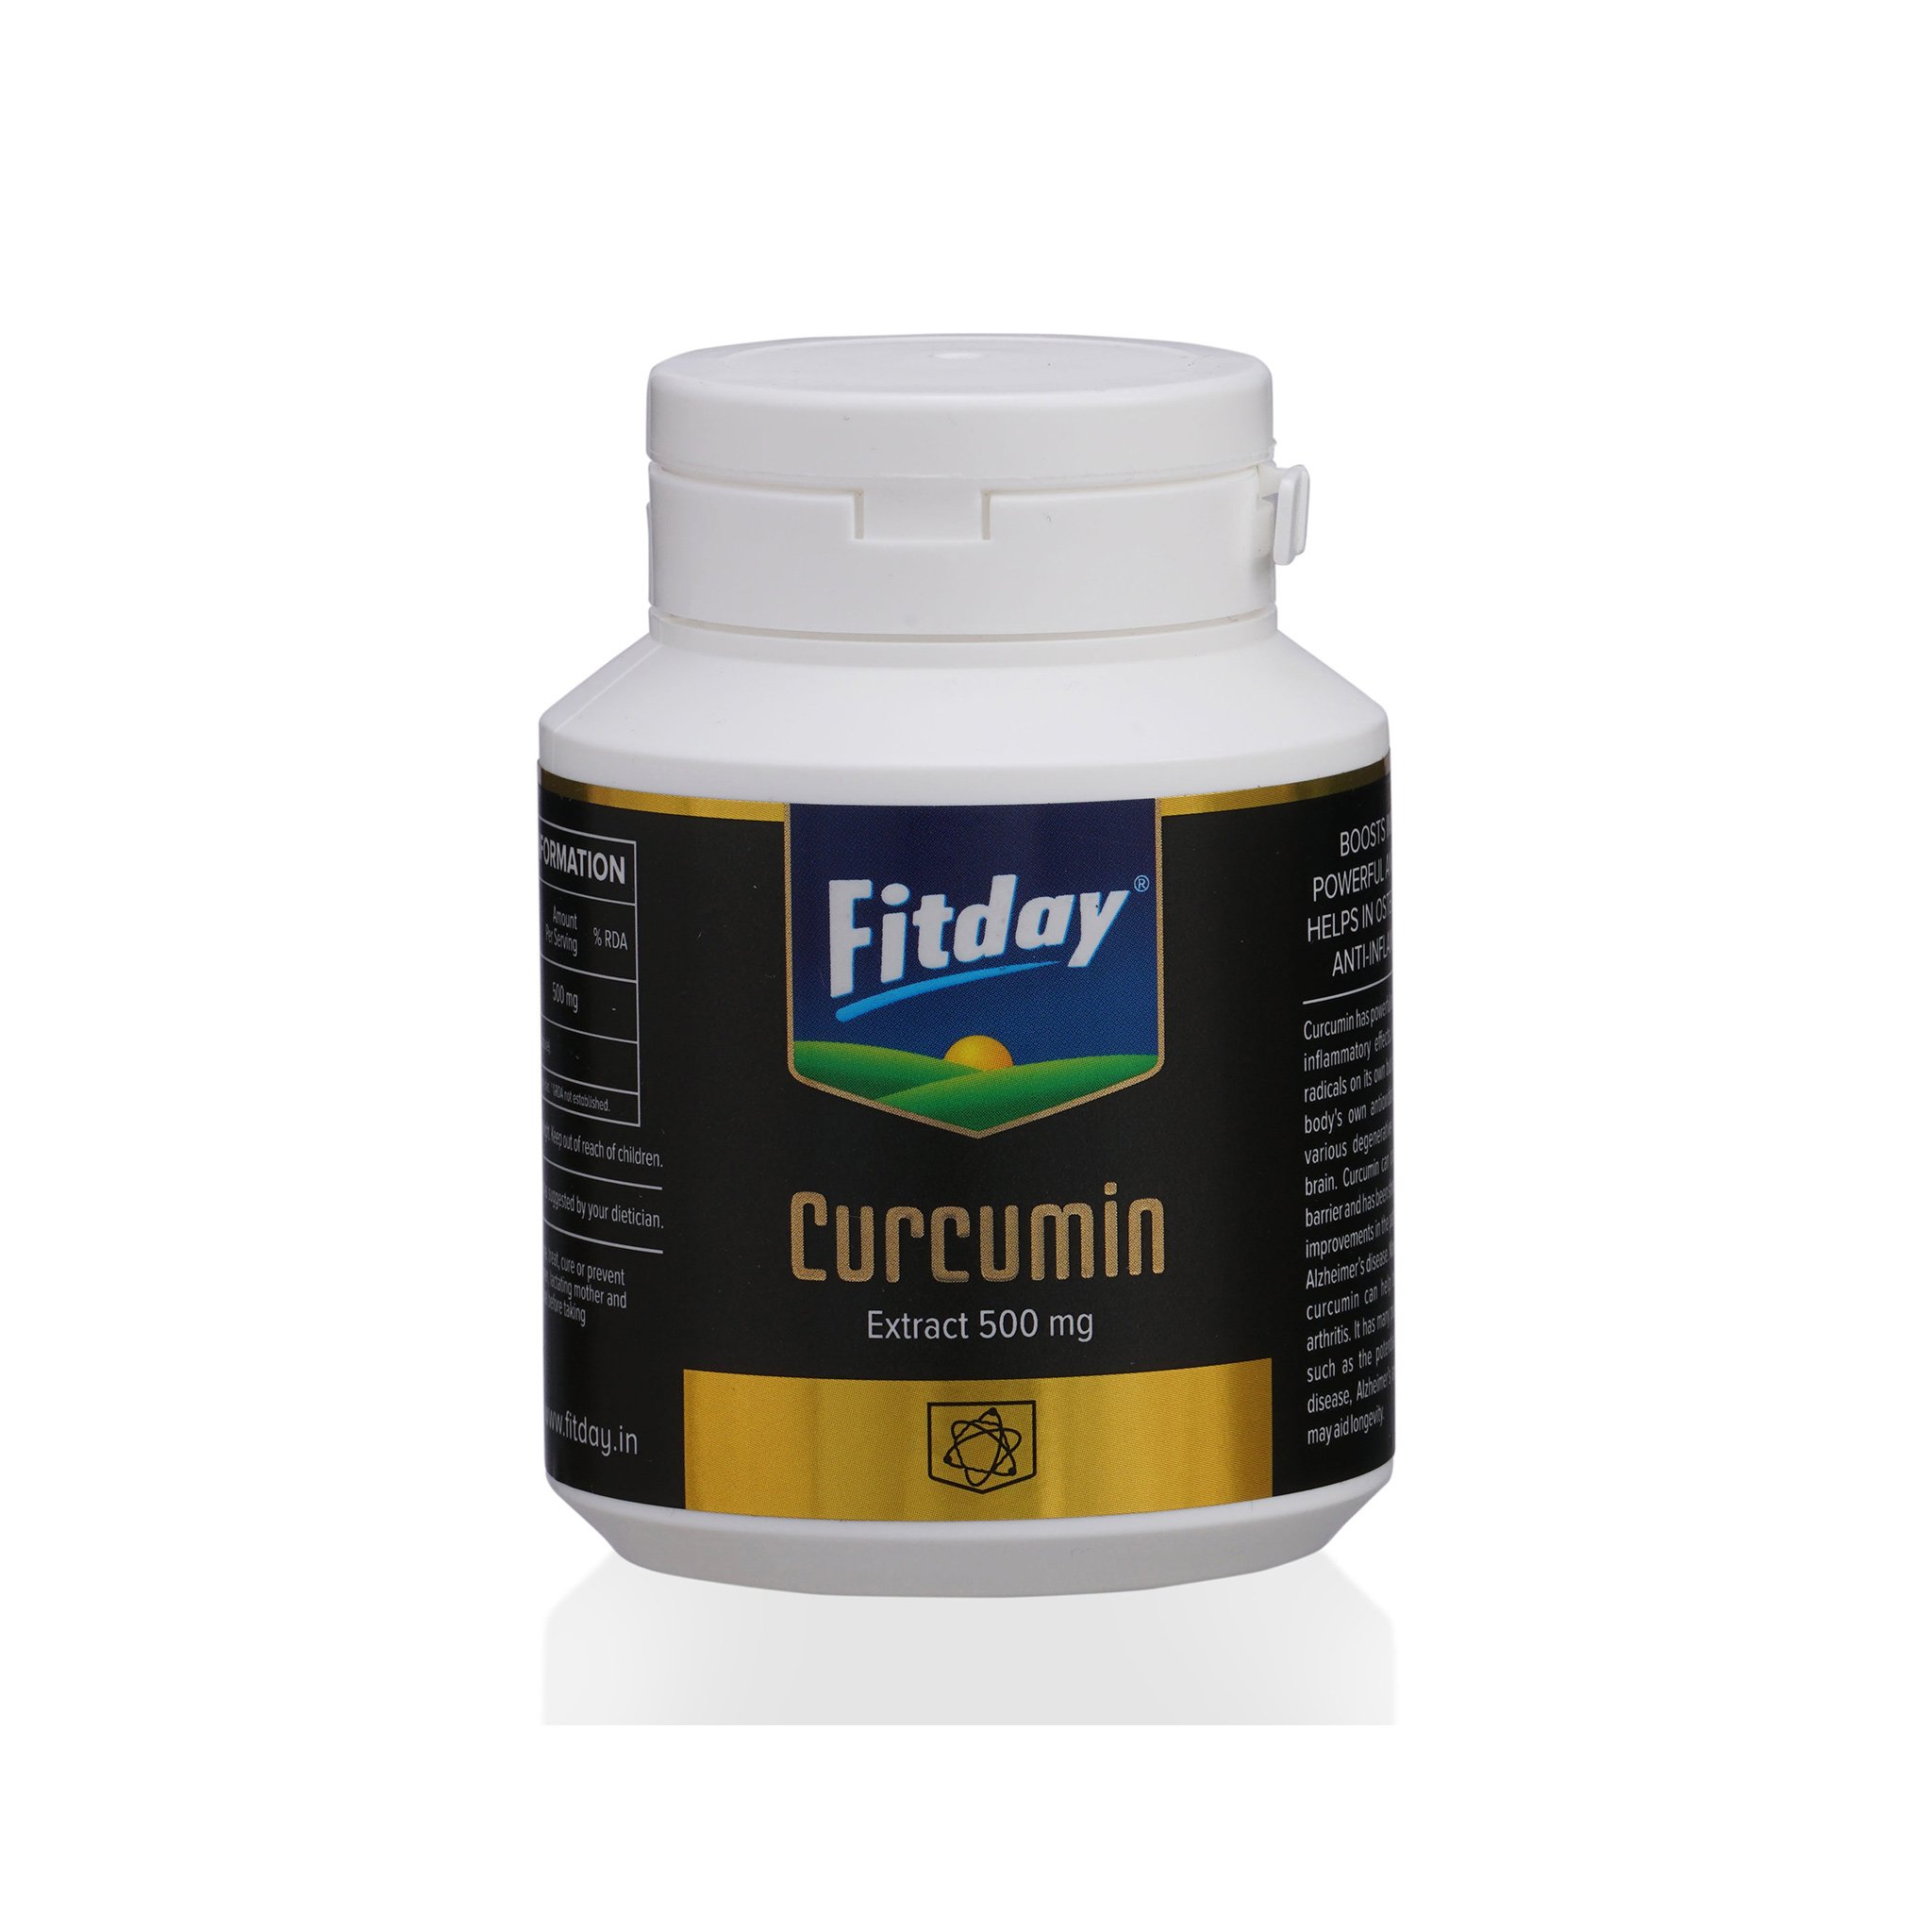  Fitday  Curcumin Extract 250mg Buy 1 Get 1 Free